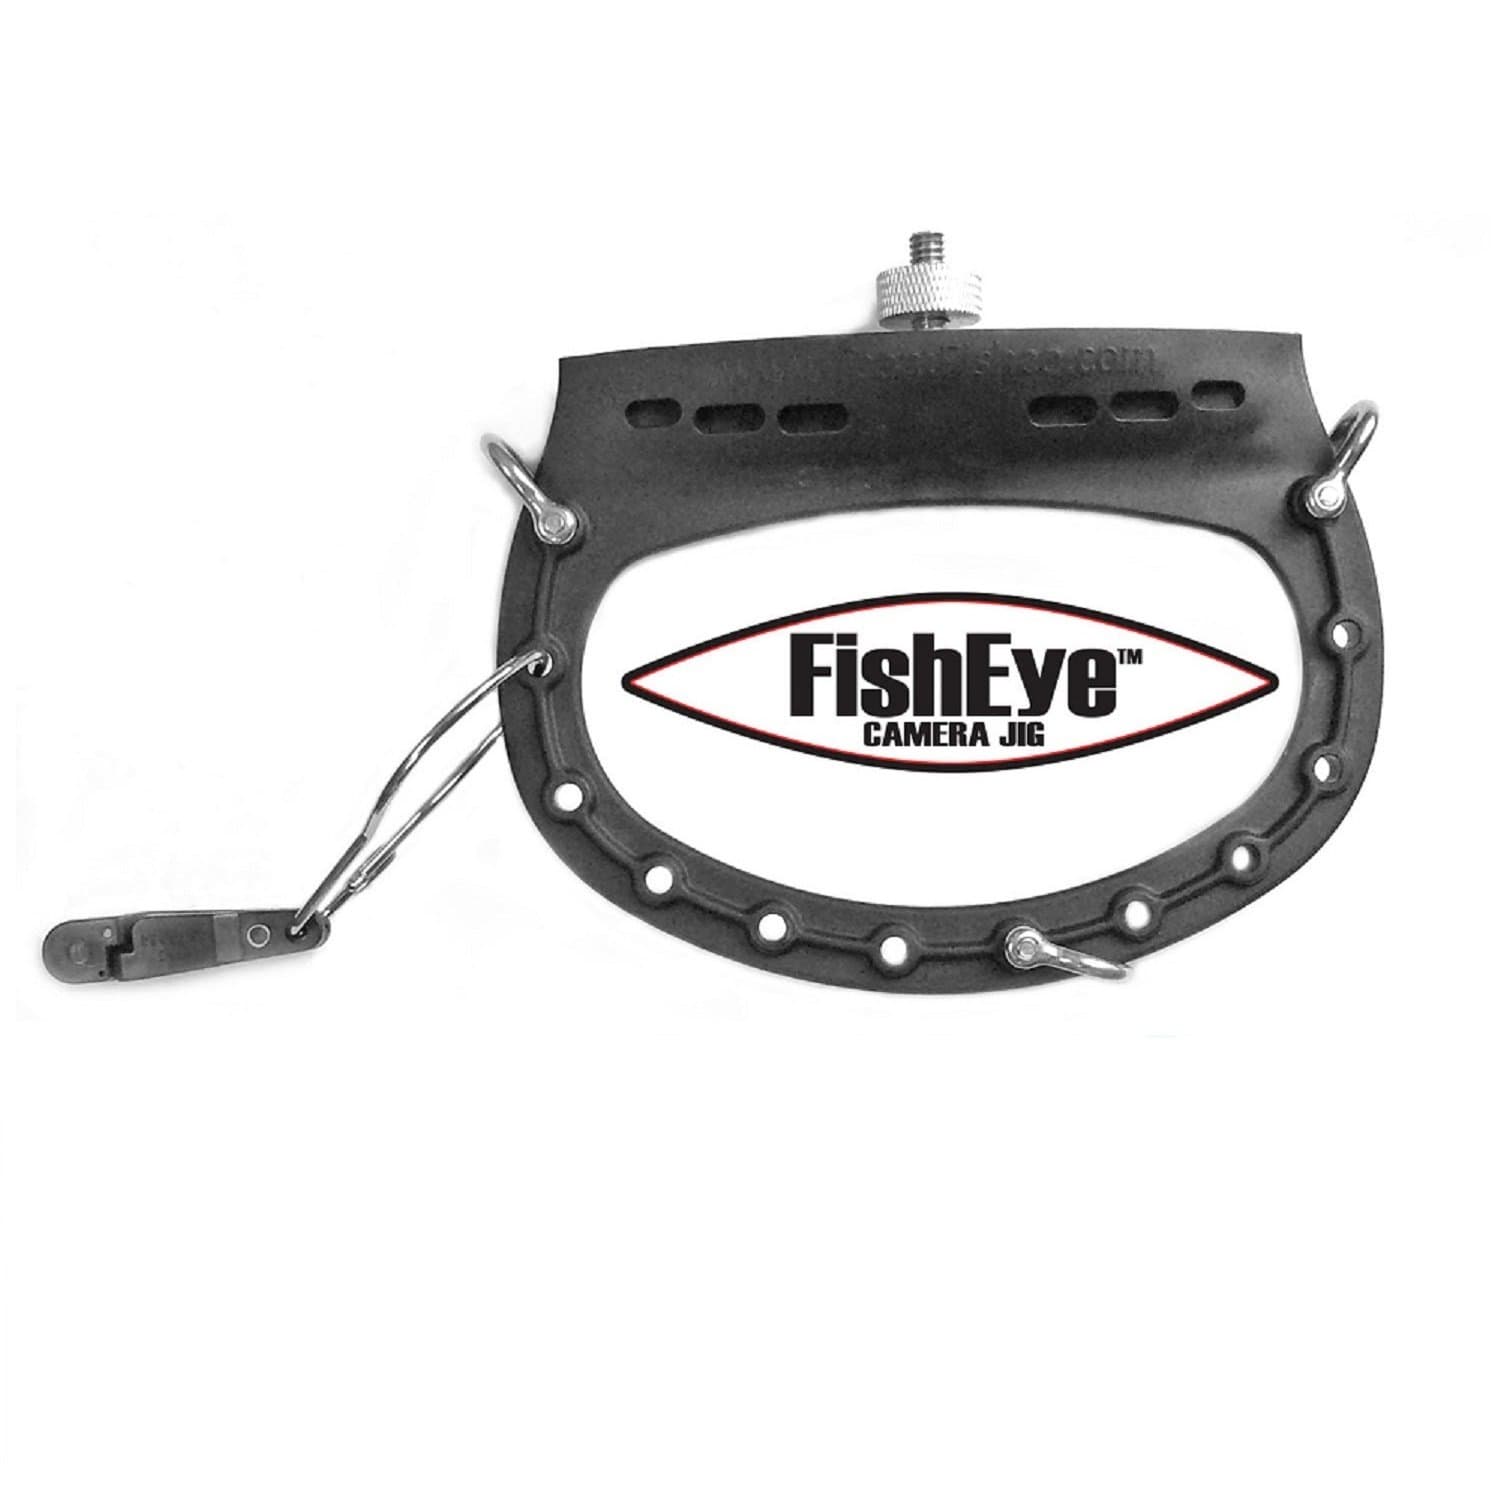 CastMate Systems Fishing : Accessories CastMate Systems FishEye Camera Jig - Camera Not Included